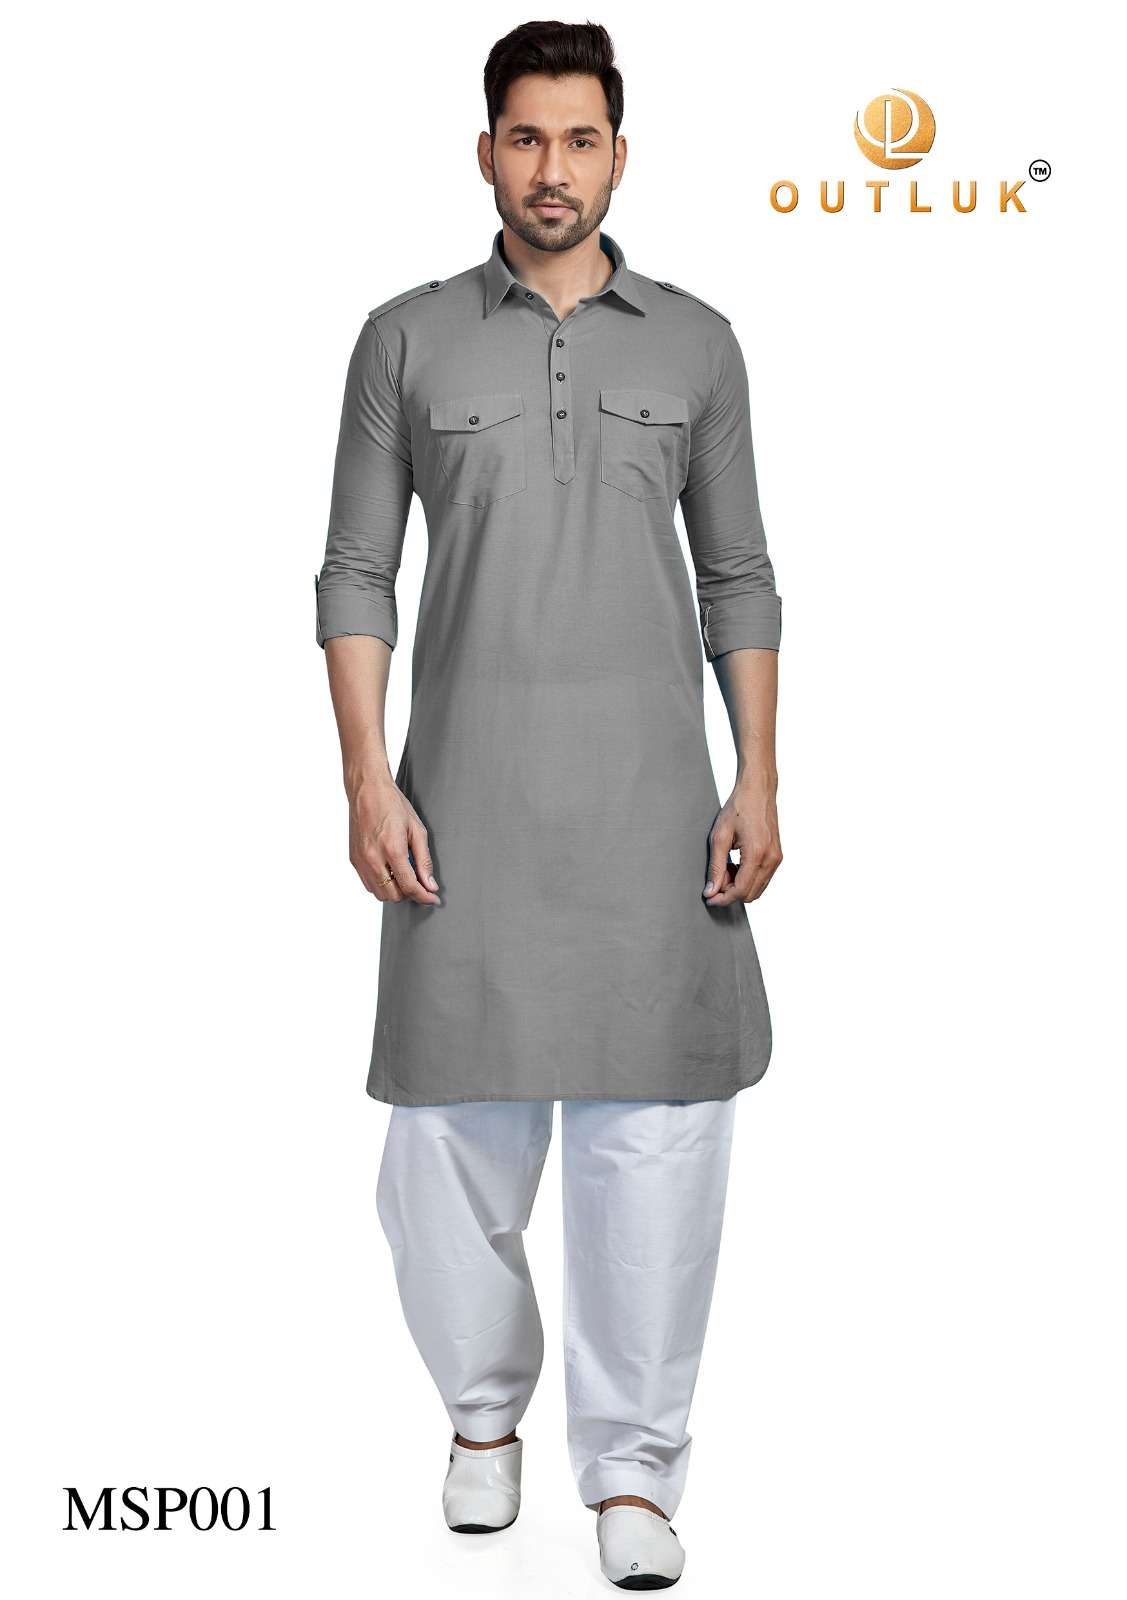 Pathani Suit- Off White Colored Pathani suit online at Shiddat.com